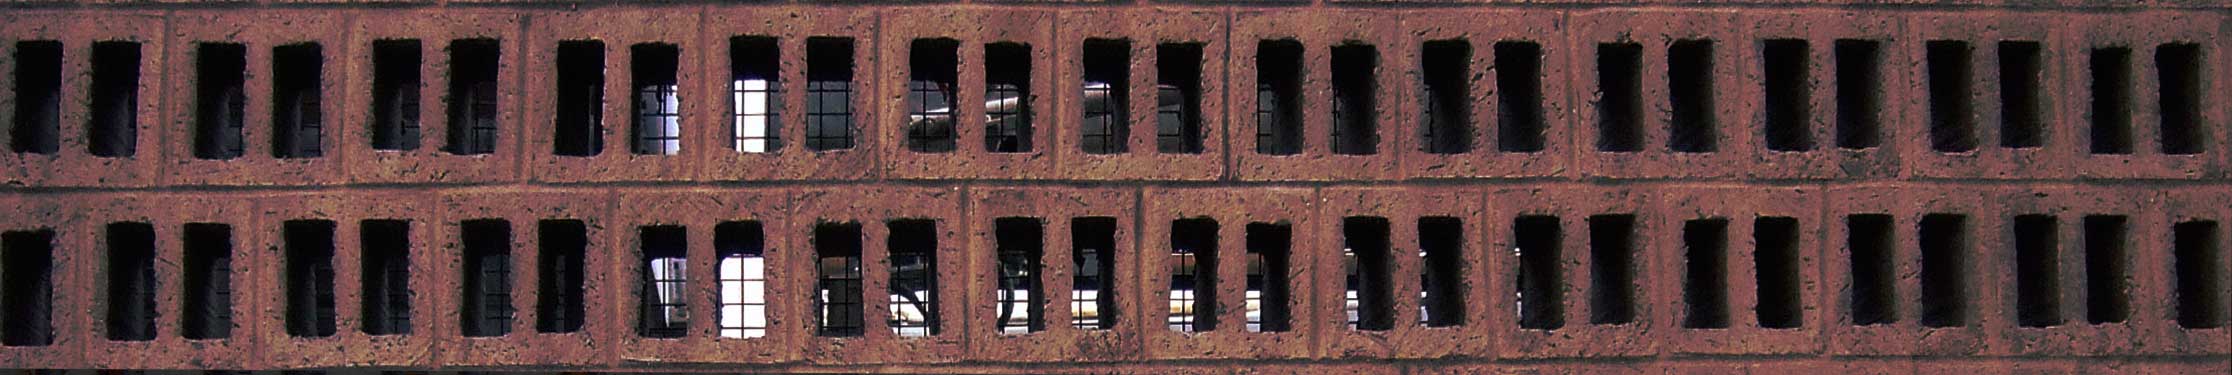 <span class="textfont">
			[scene 13 deserted]<br />
			opposite, a line of bricked up windows <br />
			telegraphs isolation and <span class="larger">abandonment </span><br />
			flattening out the expected alternation <br />
			of solid and void into mute abstraction
			</span>